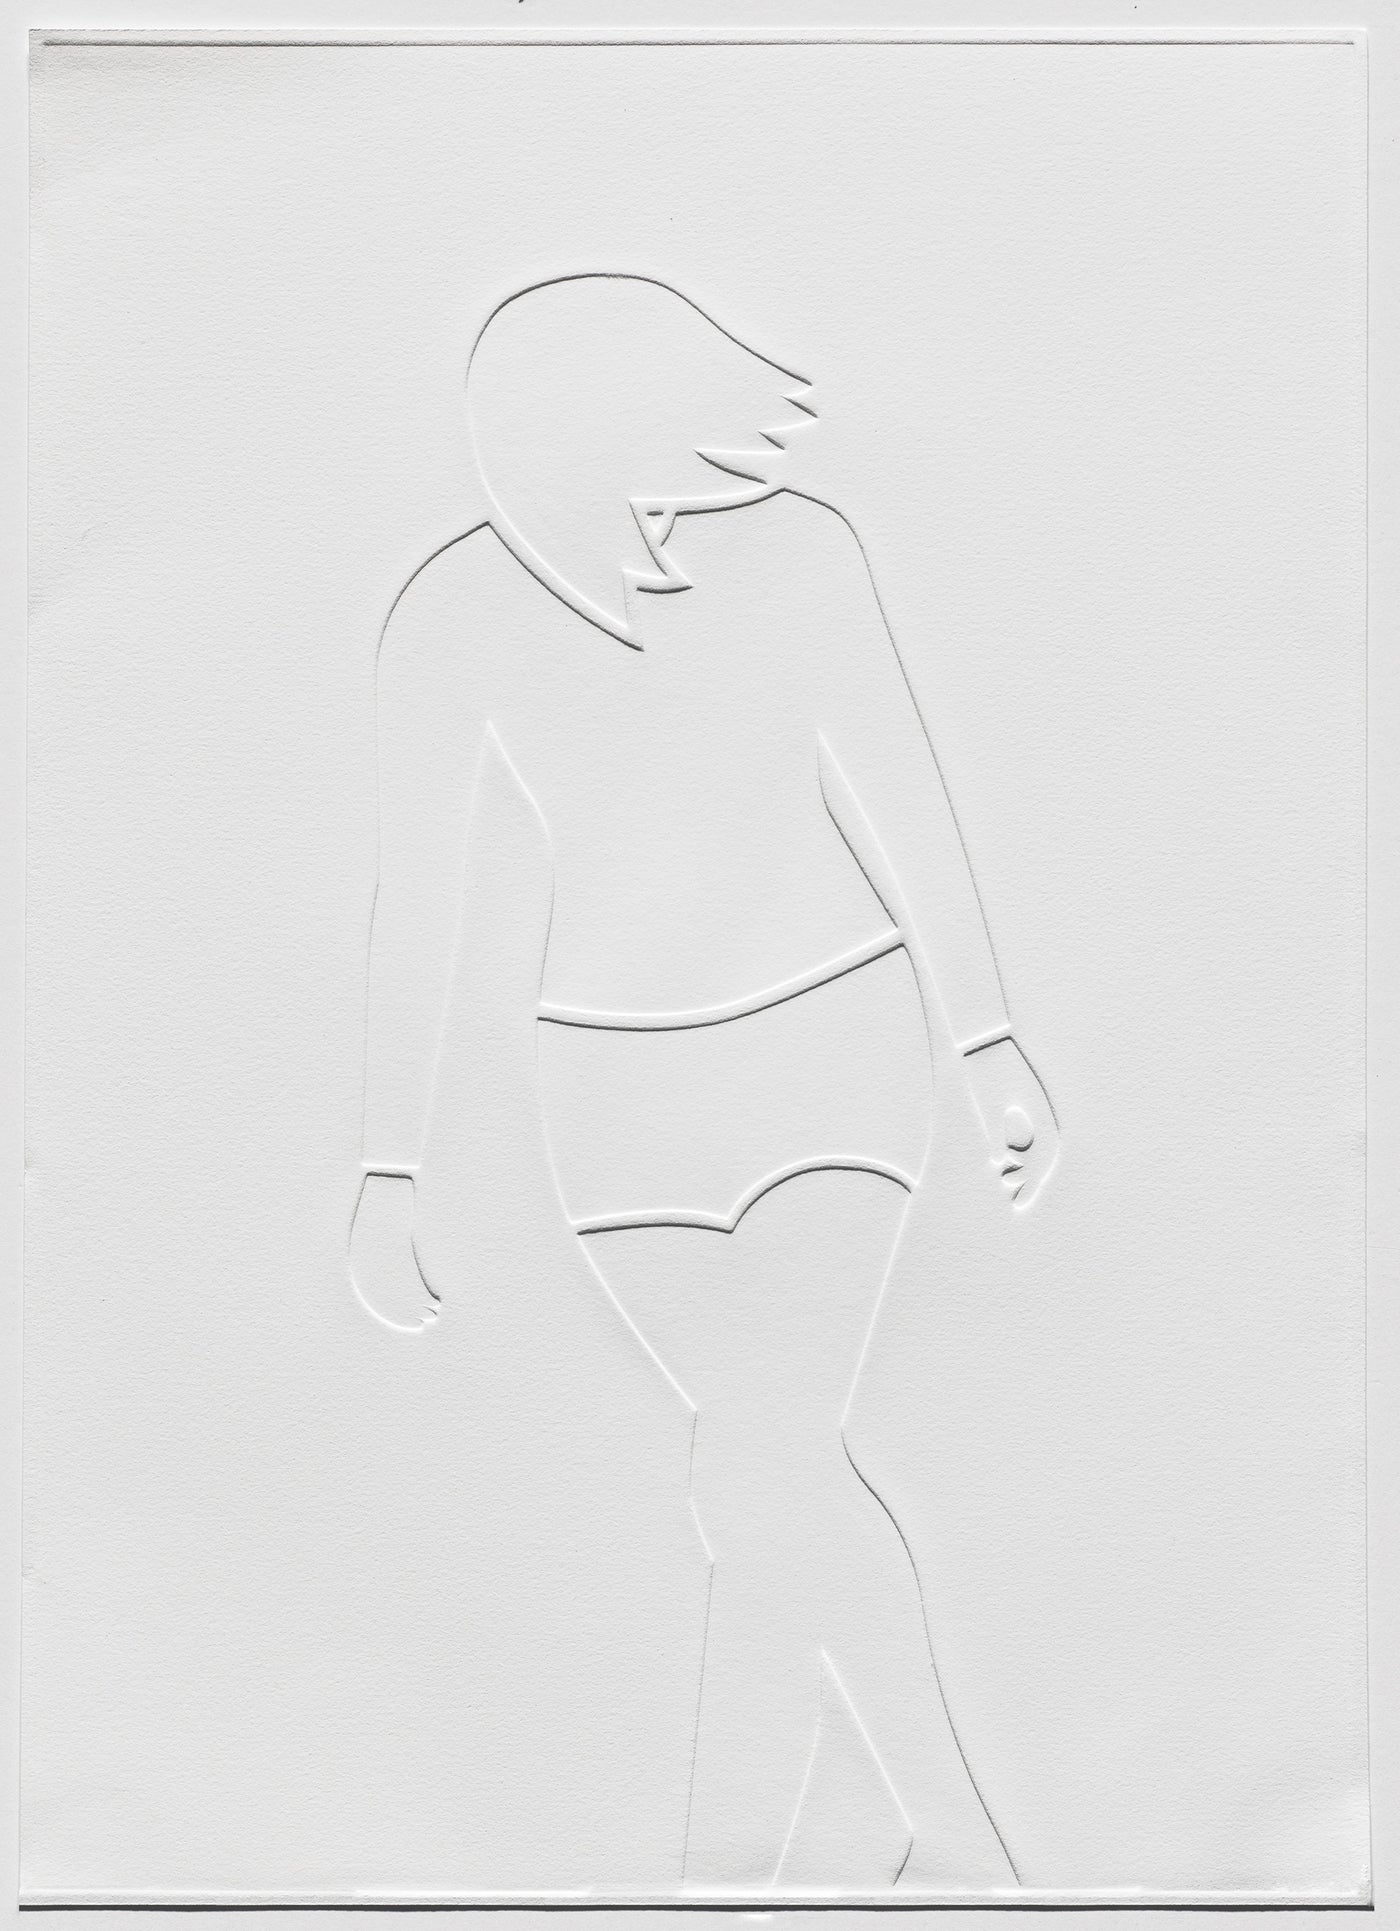 "Walking Into the Wind", 19 3/4 x 15”, debossed relief print on BFK Rives white 280gsm, 2022